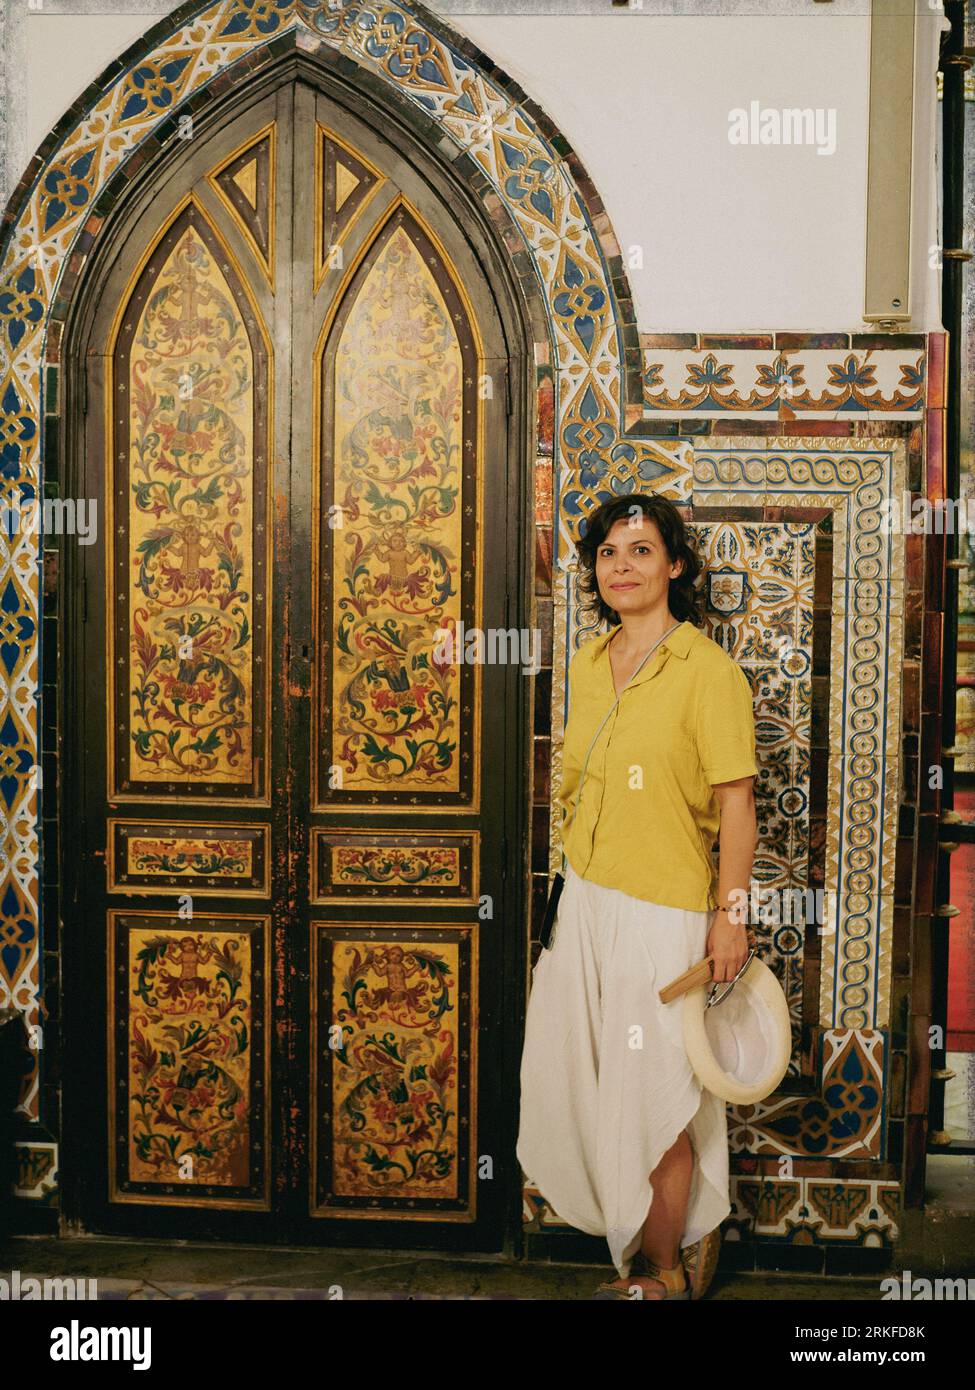 Visitor in front of a pointed arch door of the Epístola nave of the San Pedro Apostol parish, exquisitely decorated with Mudejar motifs. Stock Photo